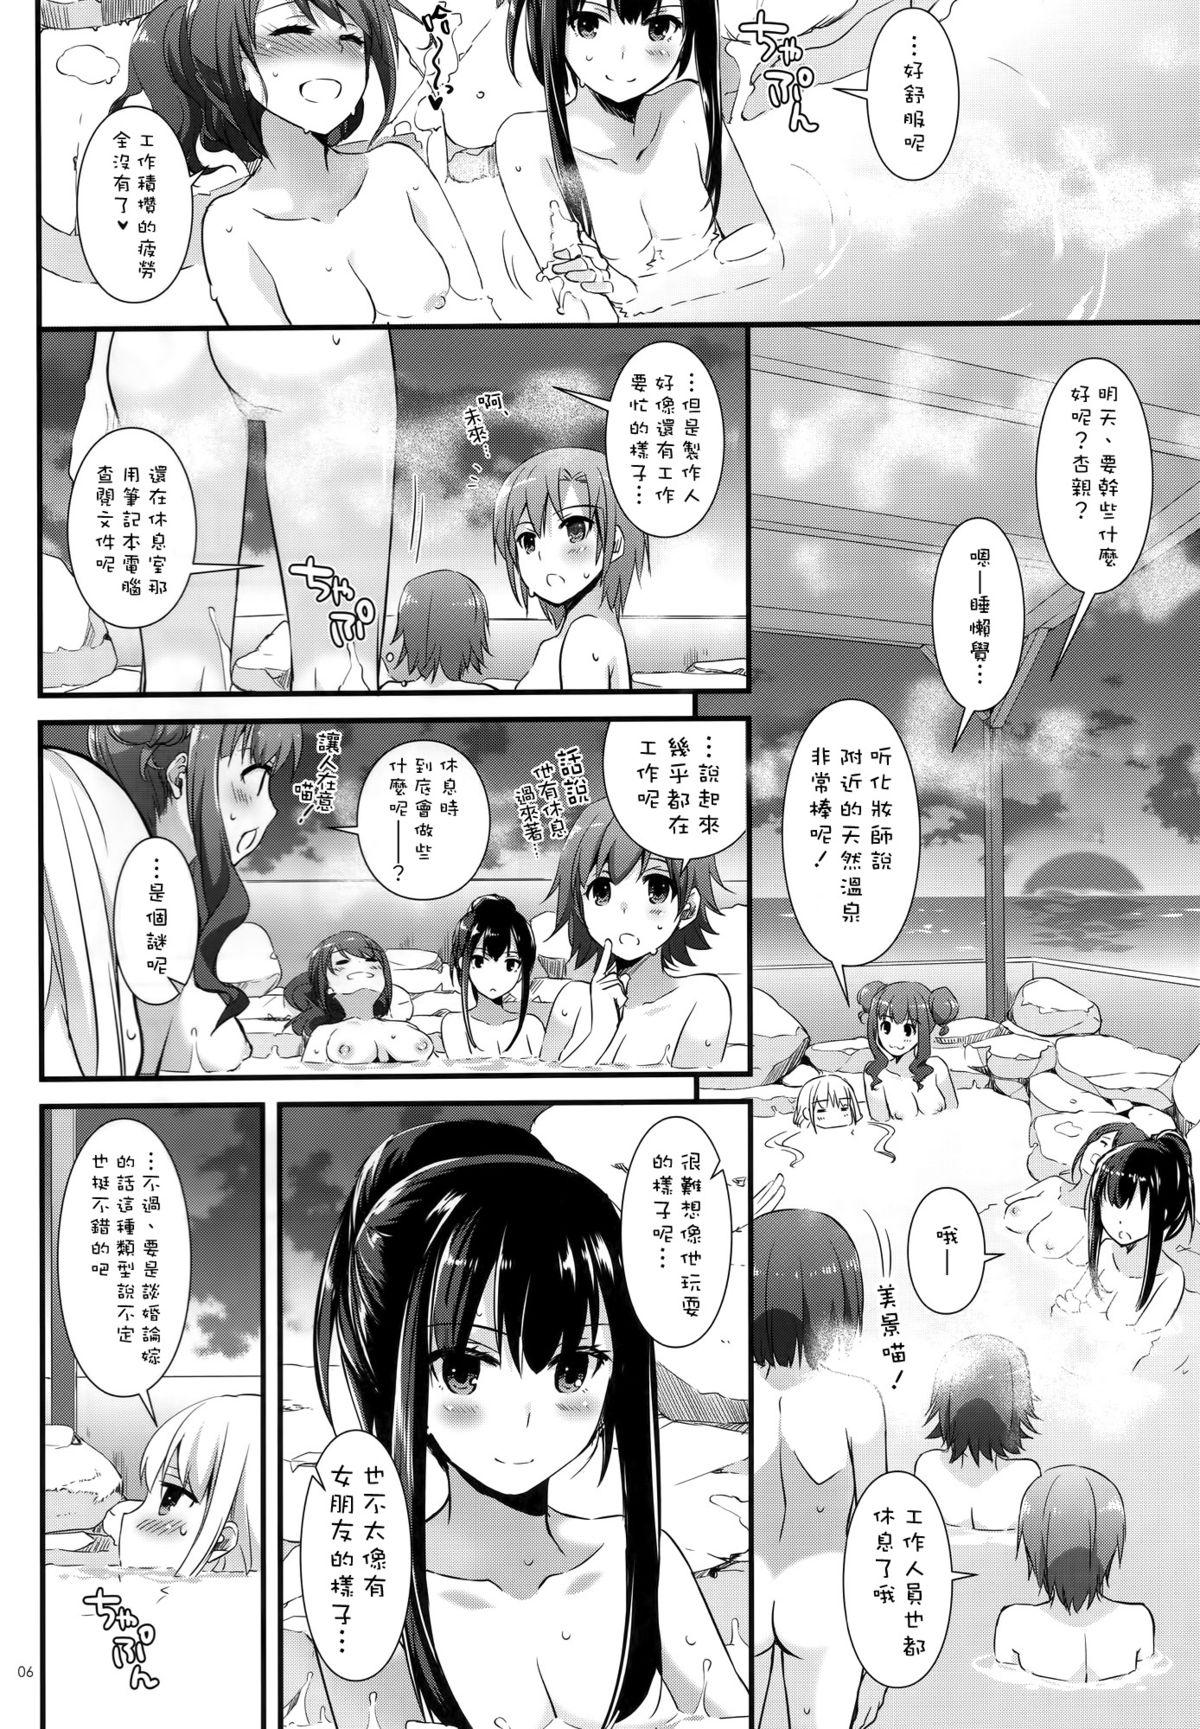 Dildos D.L. action 96 - The idolmaster Cheerleader - Page 6